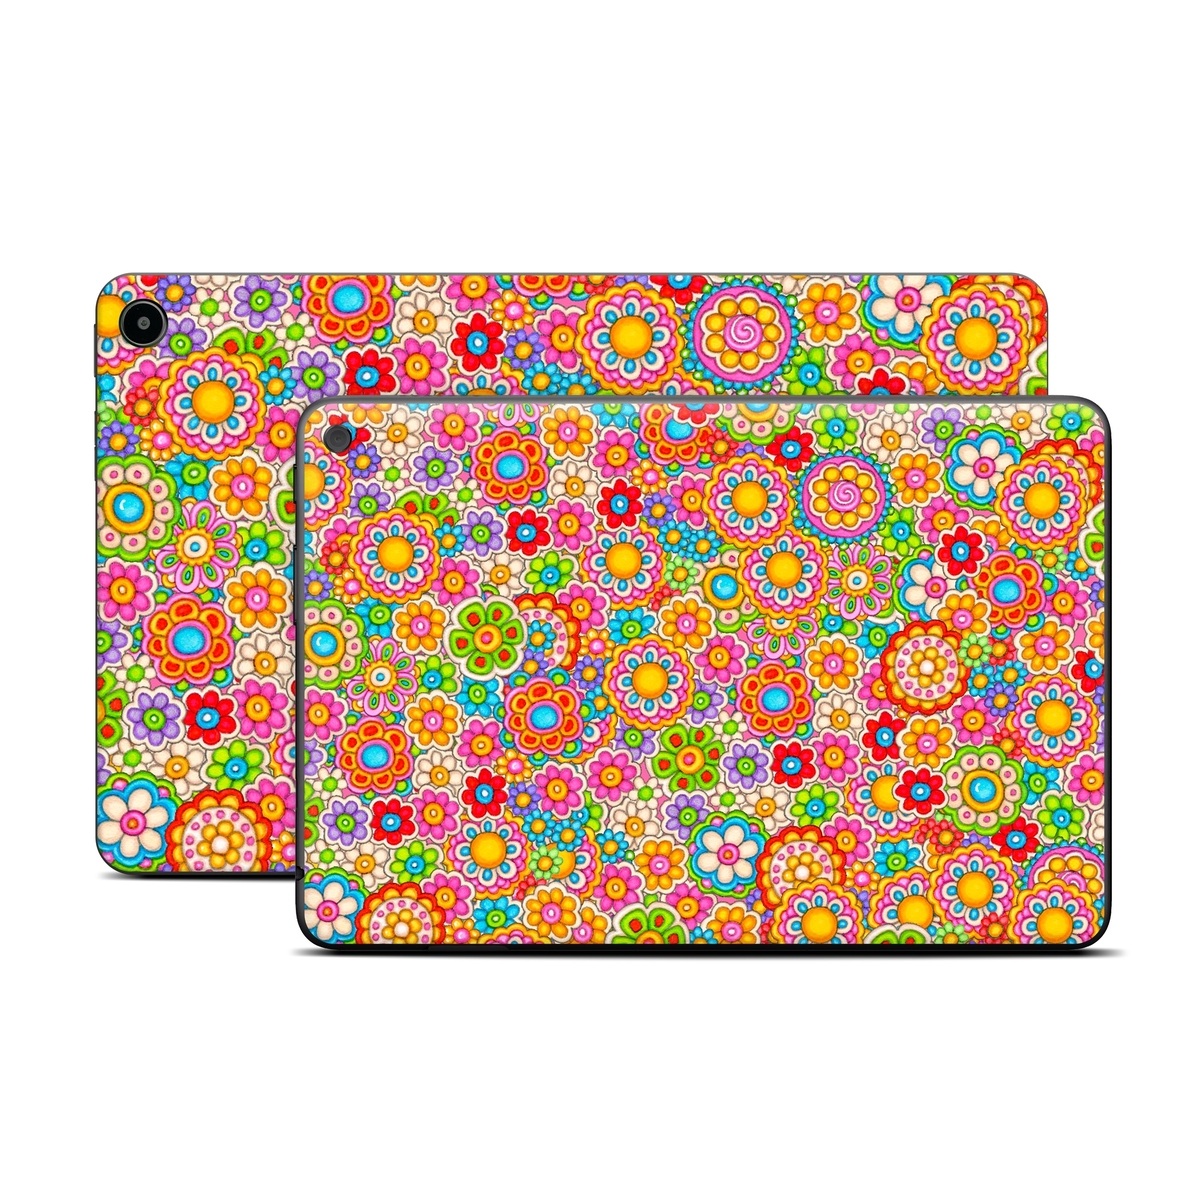 Amazon Fire Tablet Series Skin Skin design of Pattern, Design, Textile, Visual arts, with pink, red, orange, yellow, green, blue, purple colors